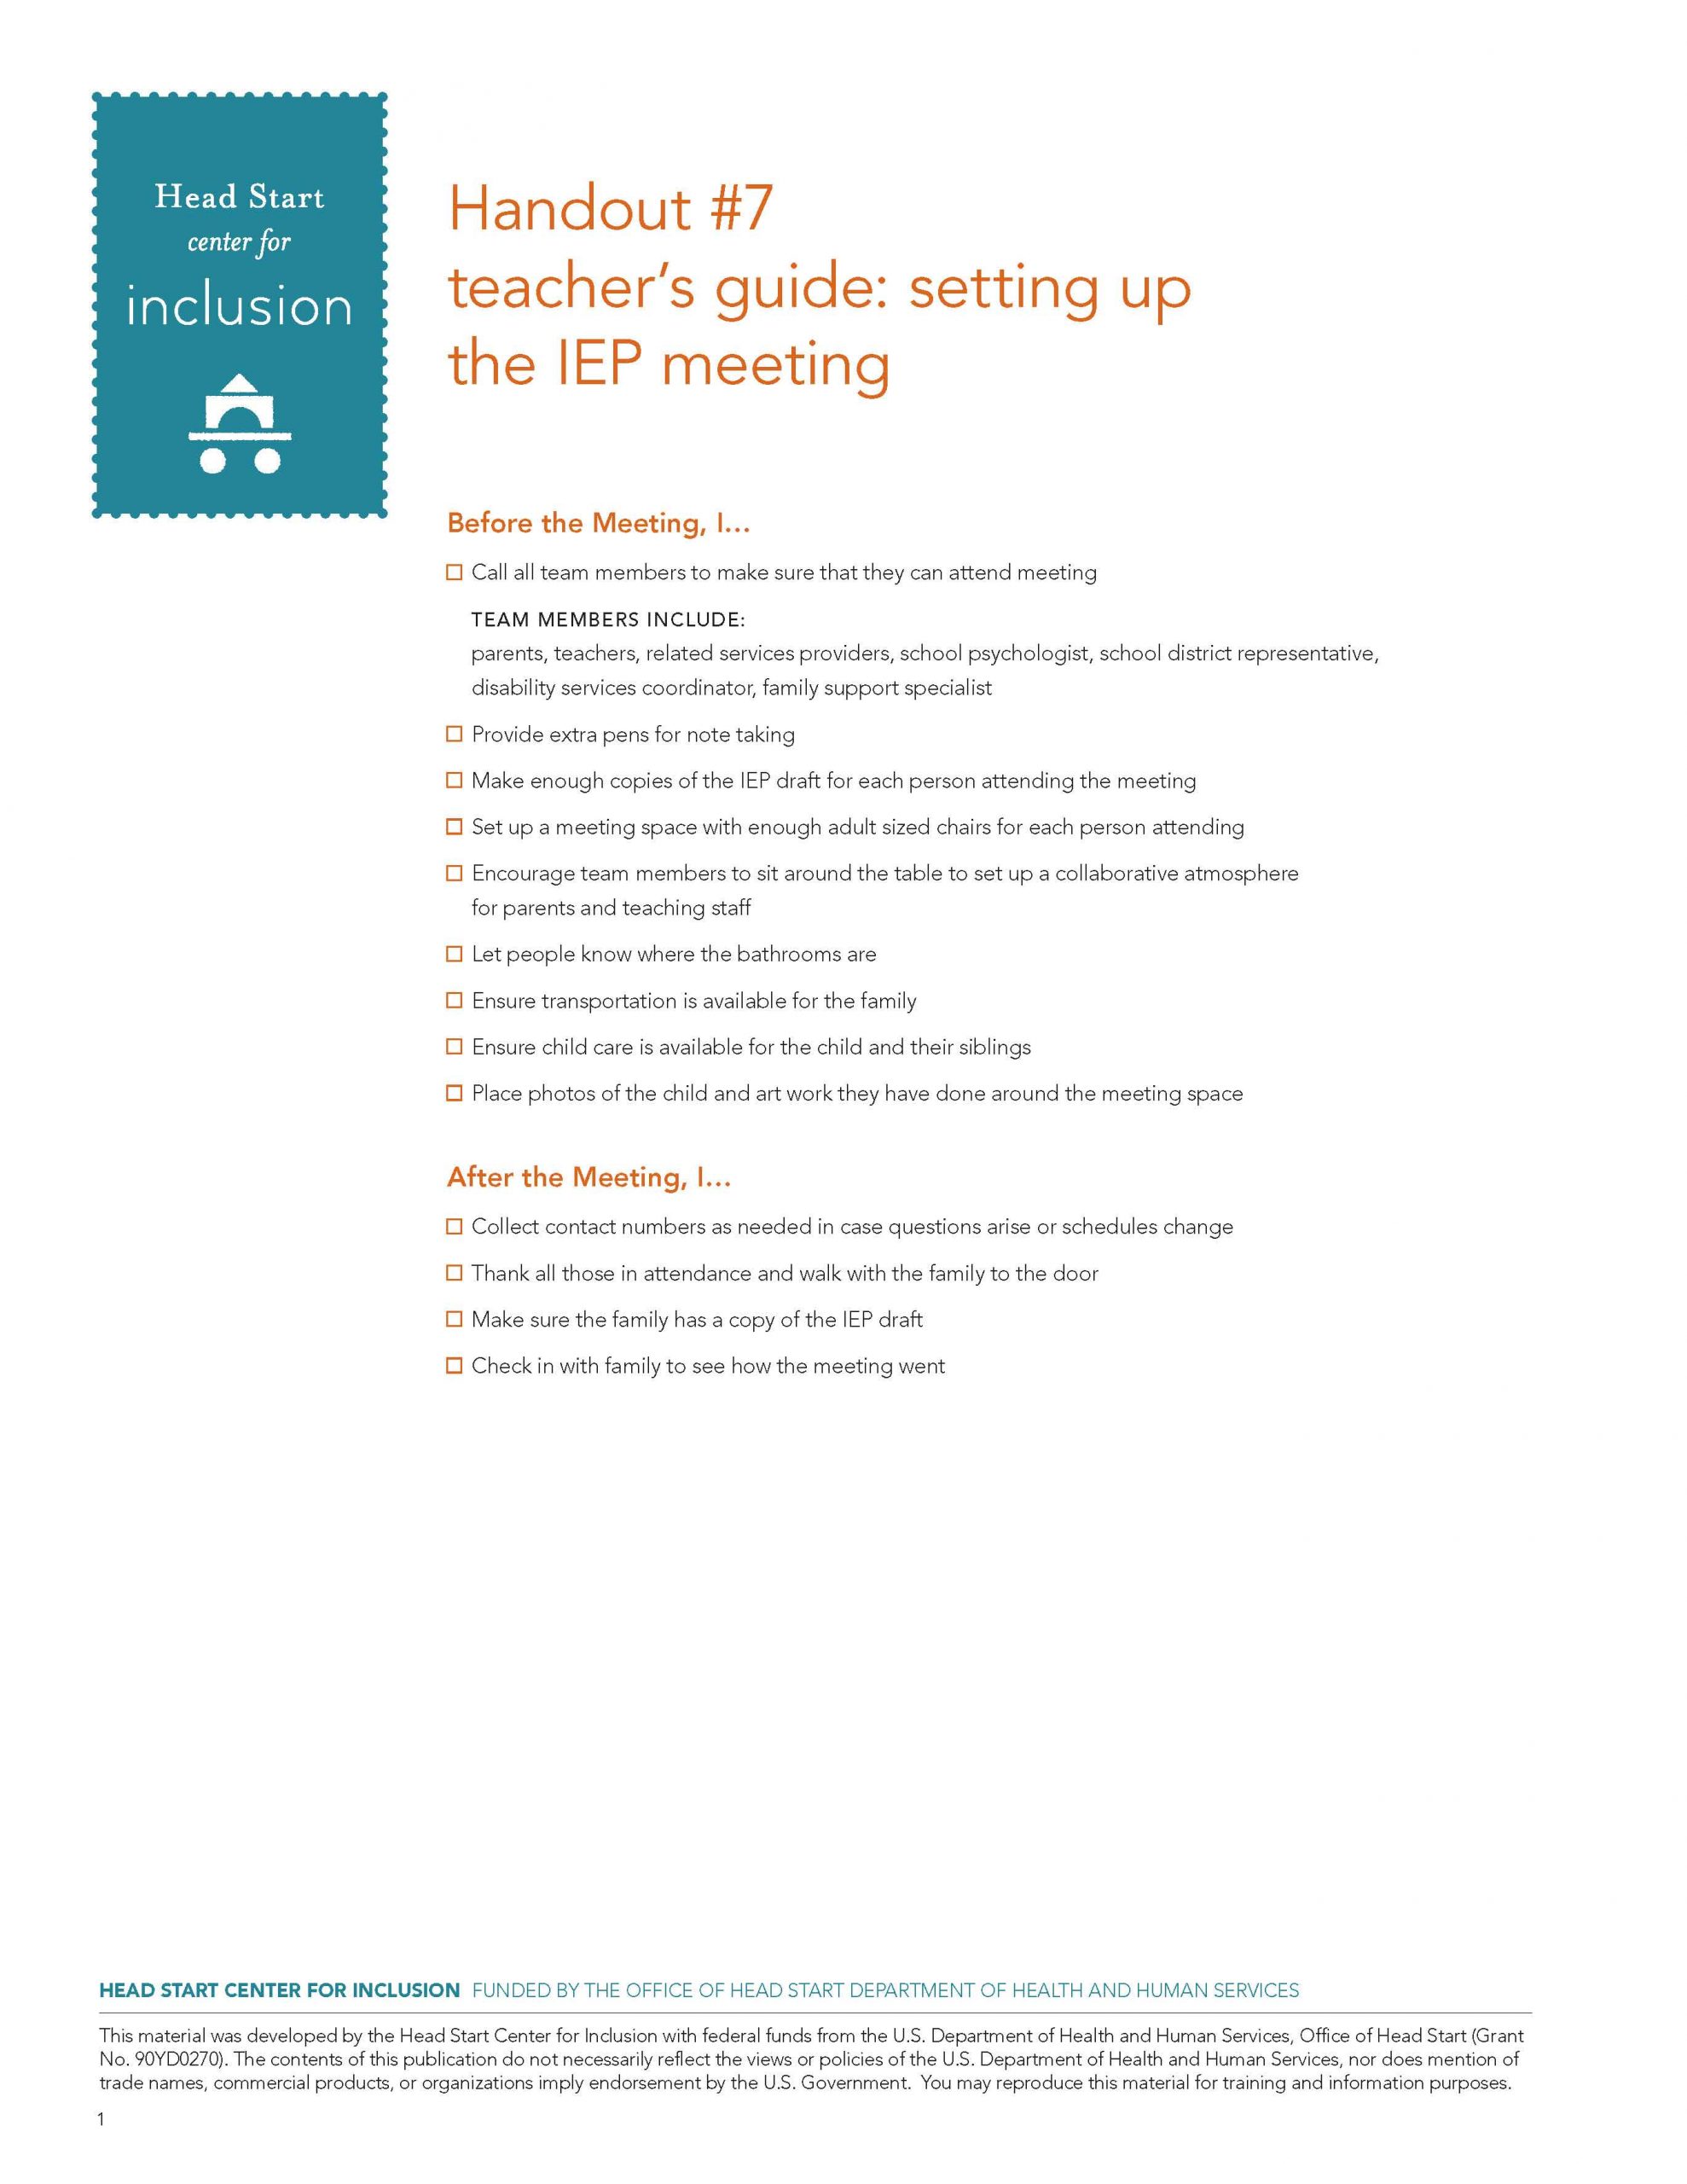 Teacher's Guide: Setting Up the IEP Meeting